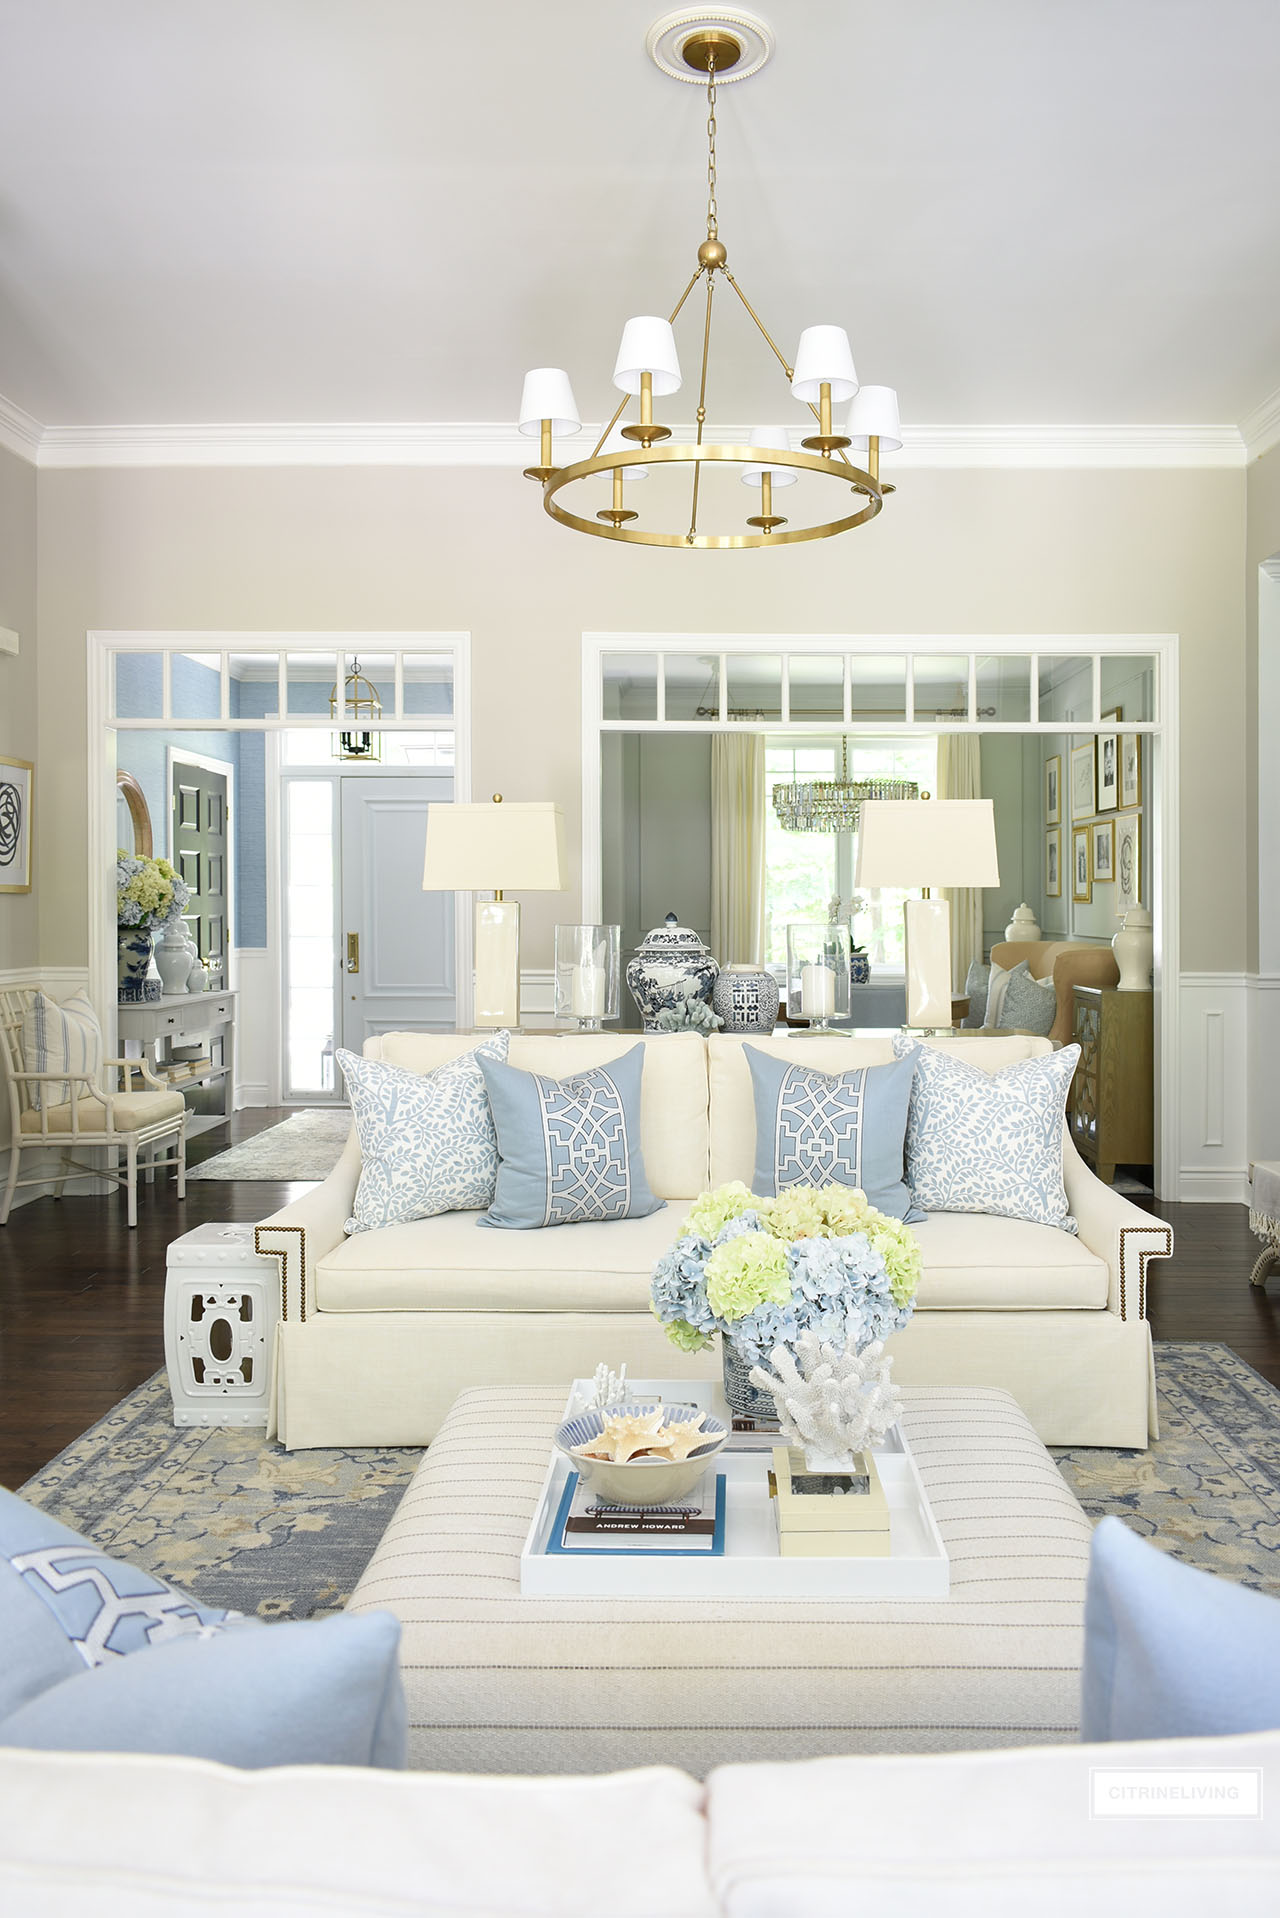 Beautiful and bright traditional living room styled for summer with pretty light blue and green hydrangeas, chinoiserie accents, coastal decor and designer pillows.